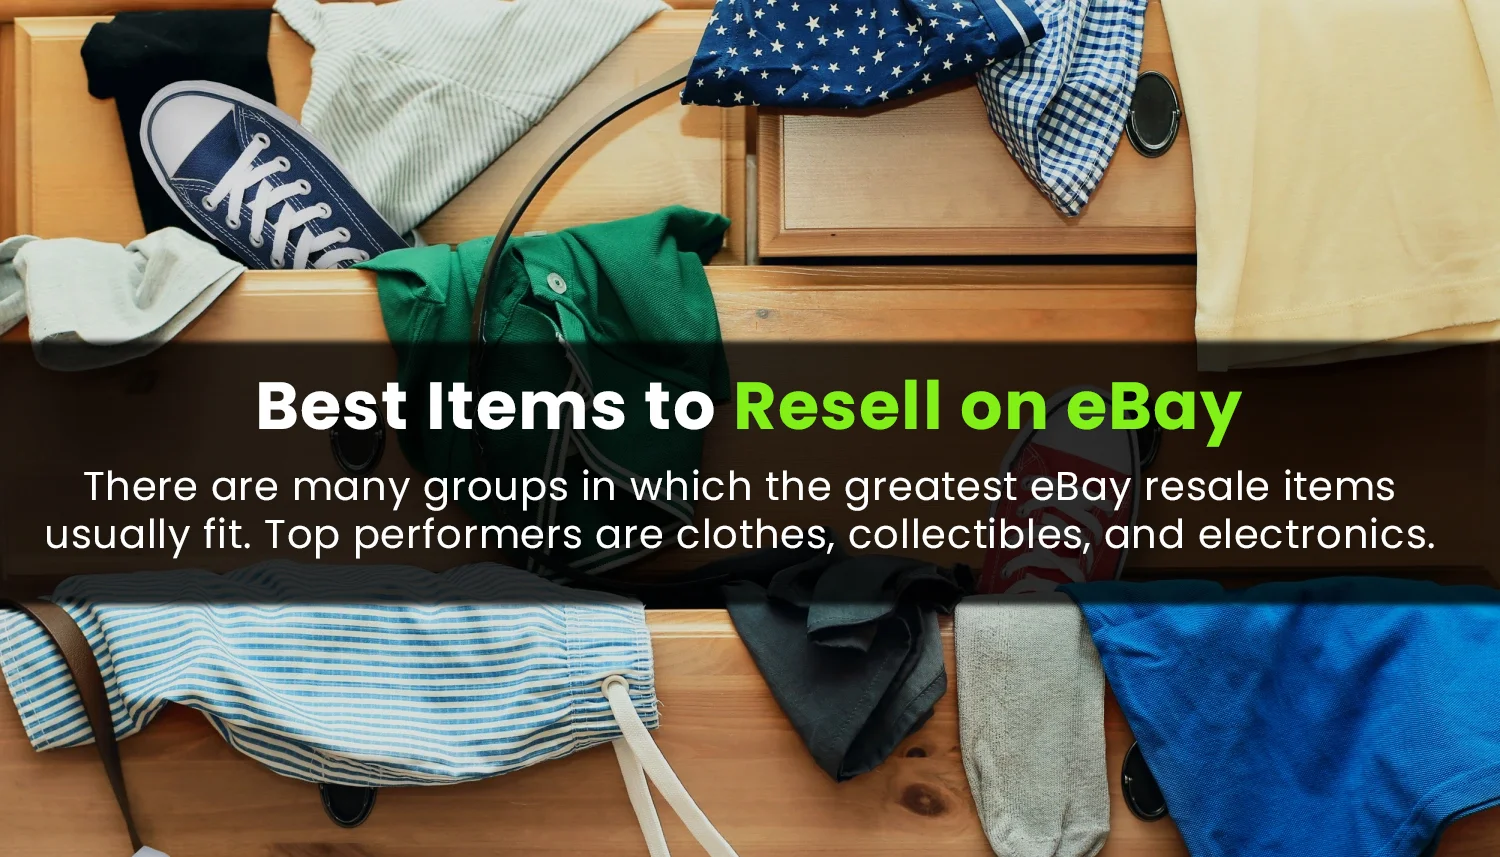 Best Items to Resell on eBay